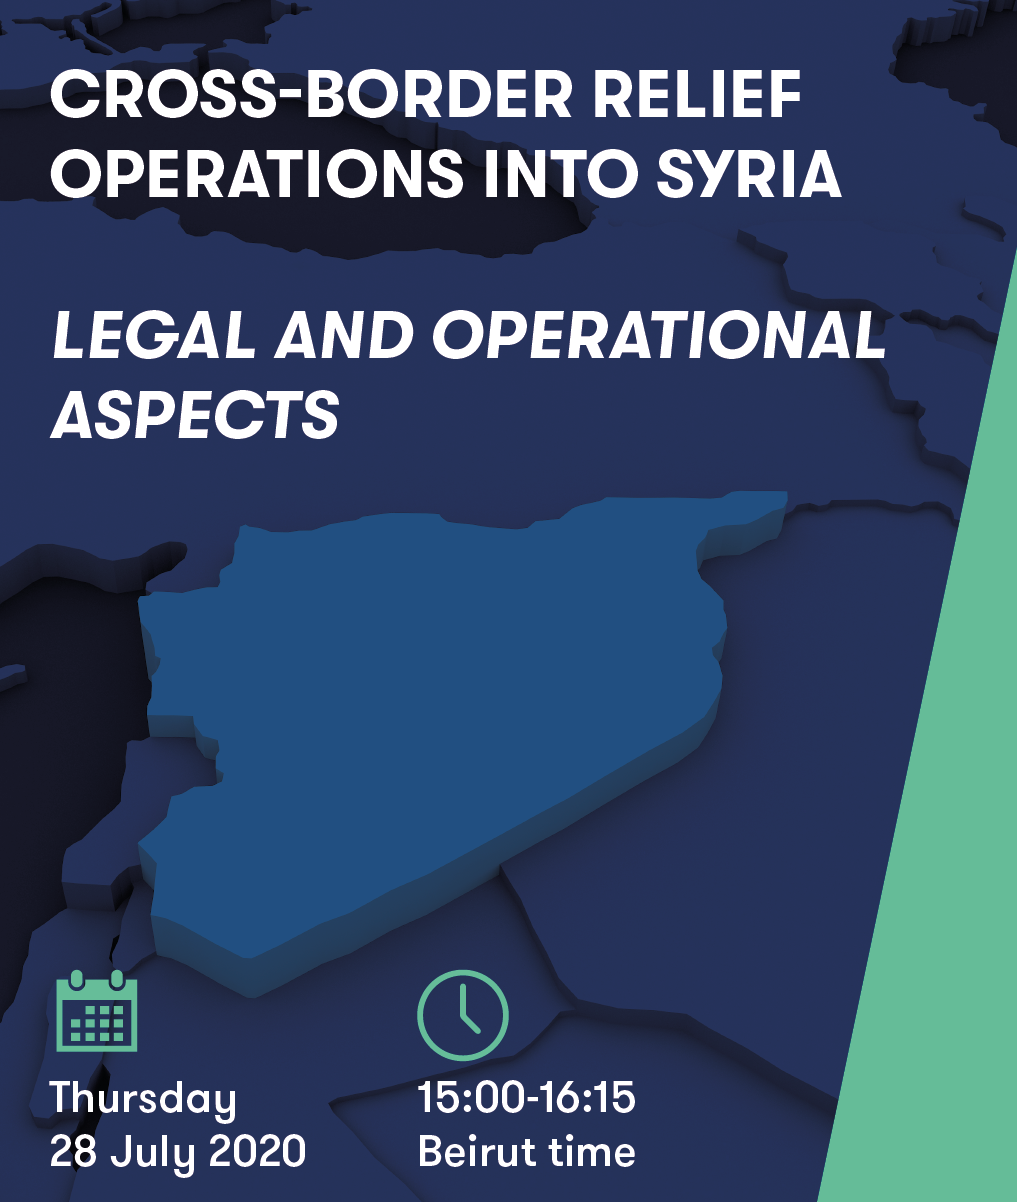 Cross-border relief operations into Syria: Legal and Operational aspects